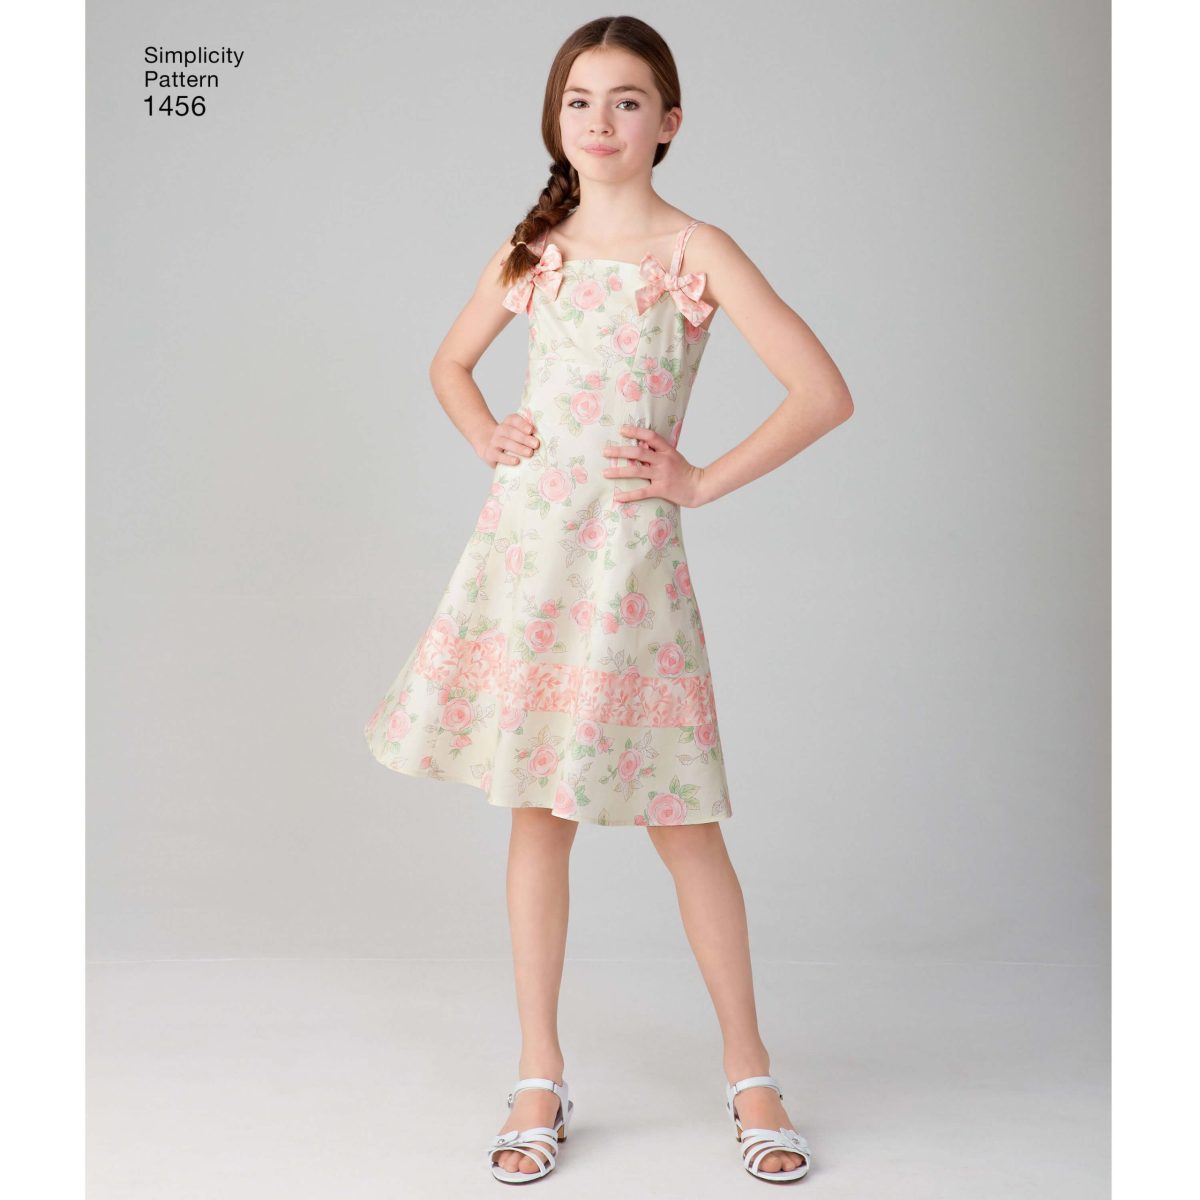 Simplicity Sewing Pattern 1456 Child's and Girls' Dress with Bodice Variations and Hat